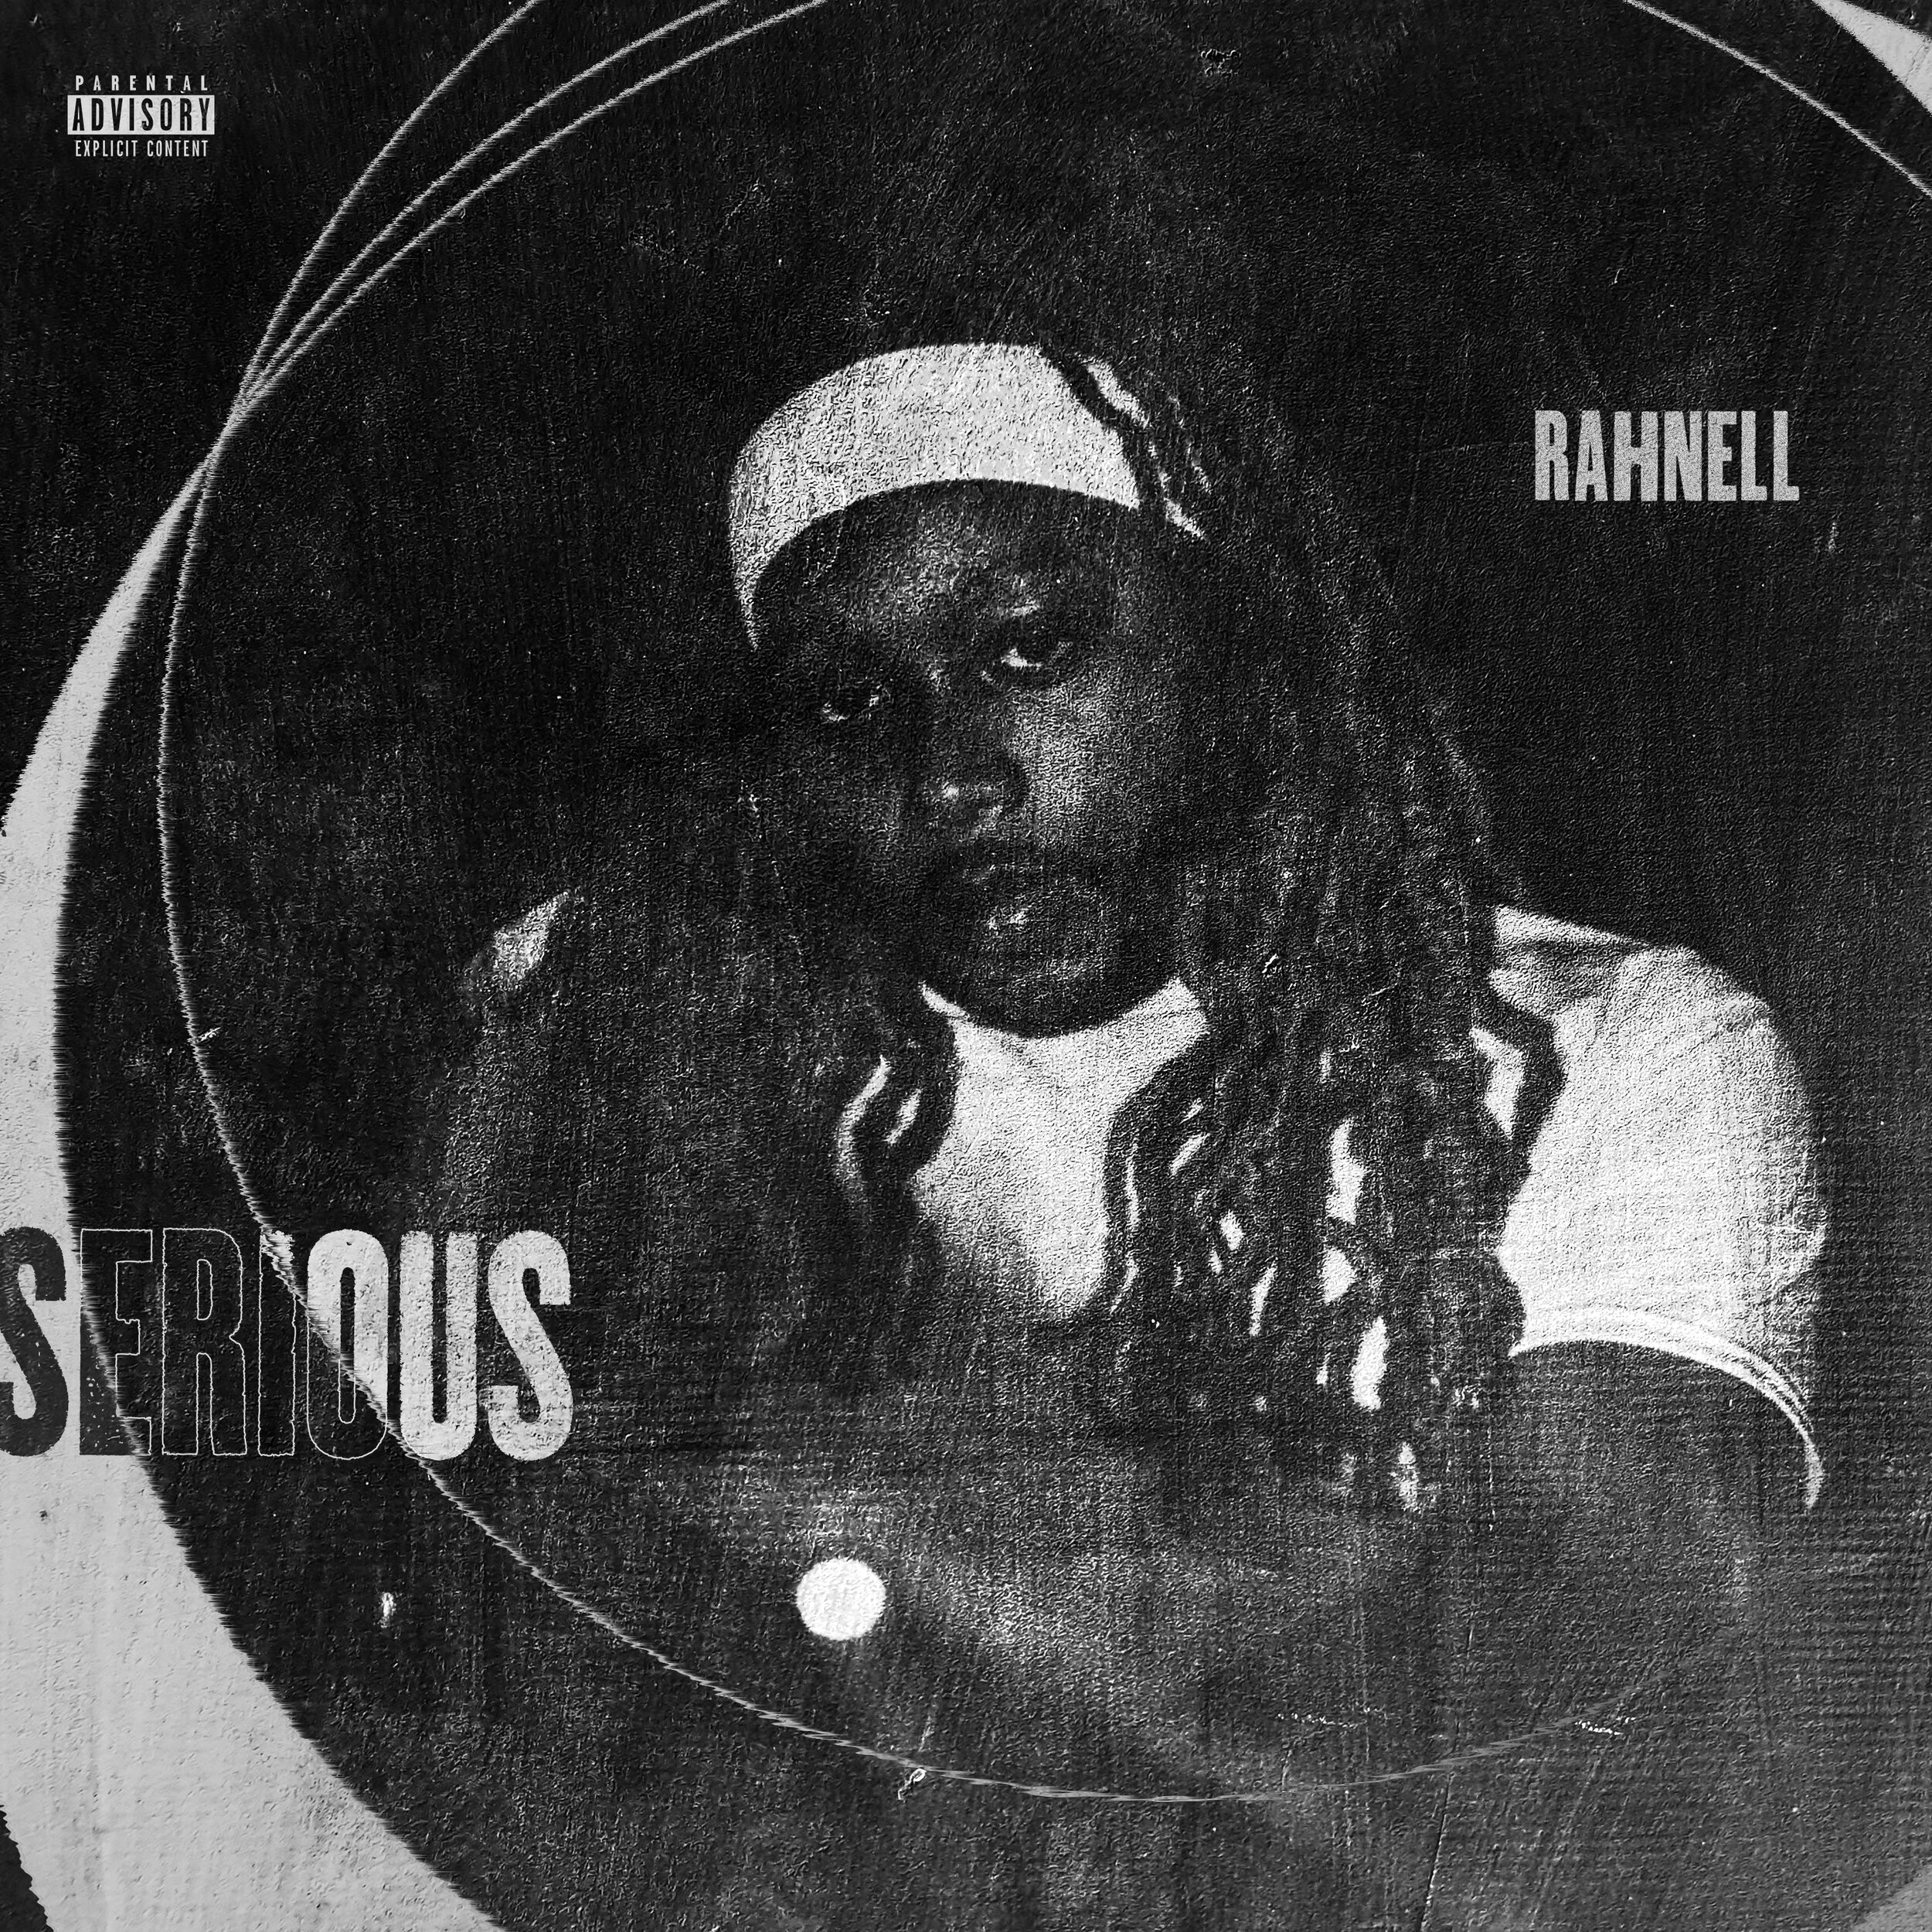 Rahnell - Serious